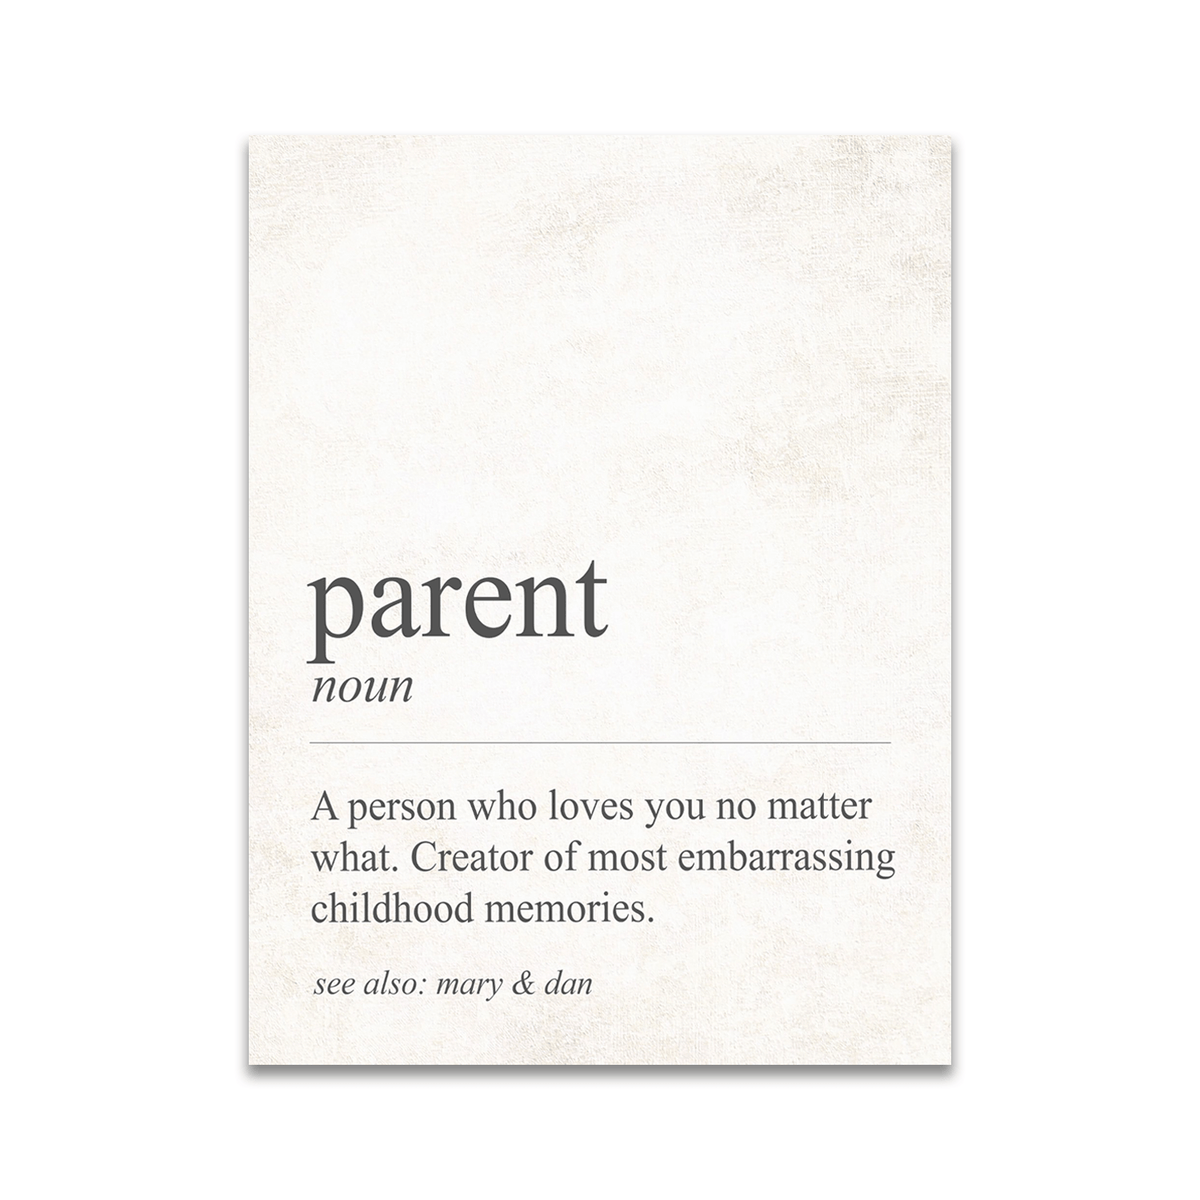 Parent definition sign - A person who loves you no matter what. Creator of most embarrassing childhood memories